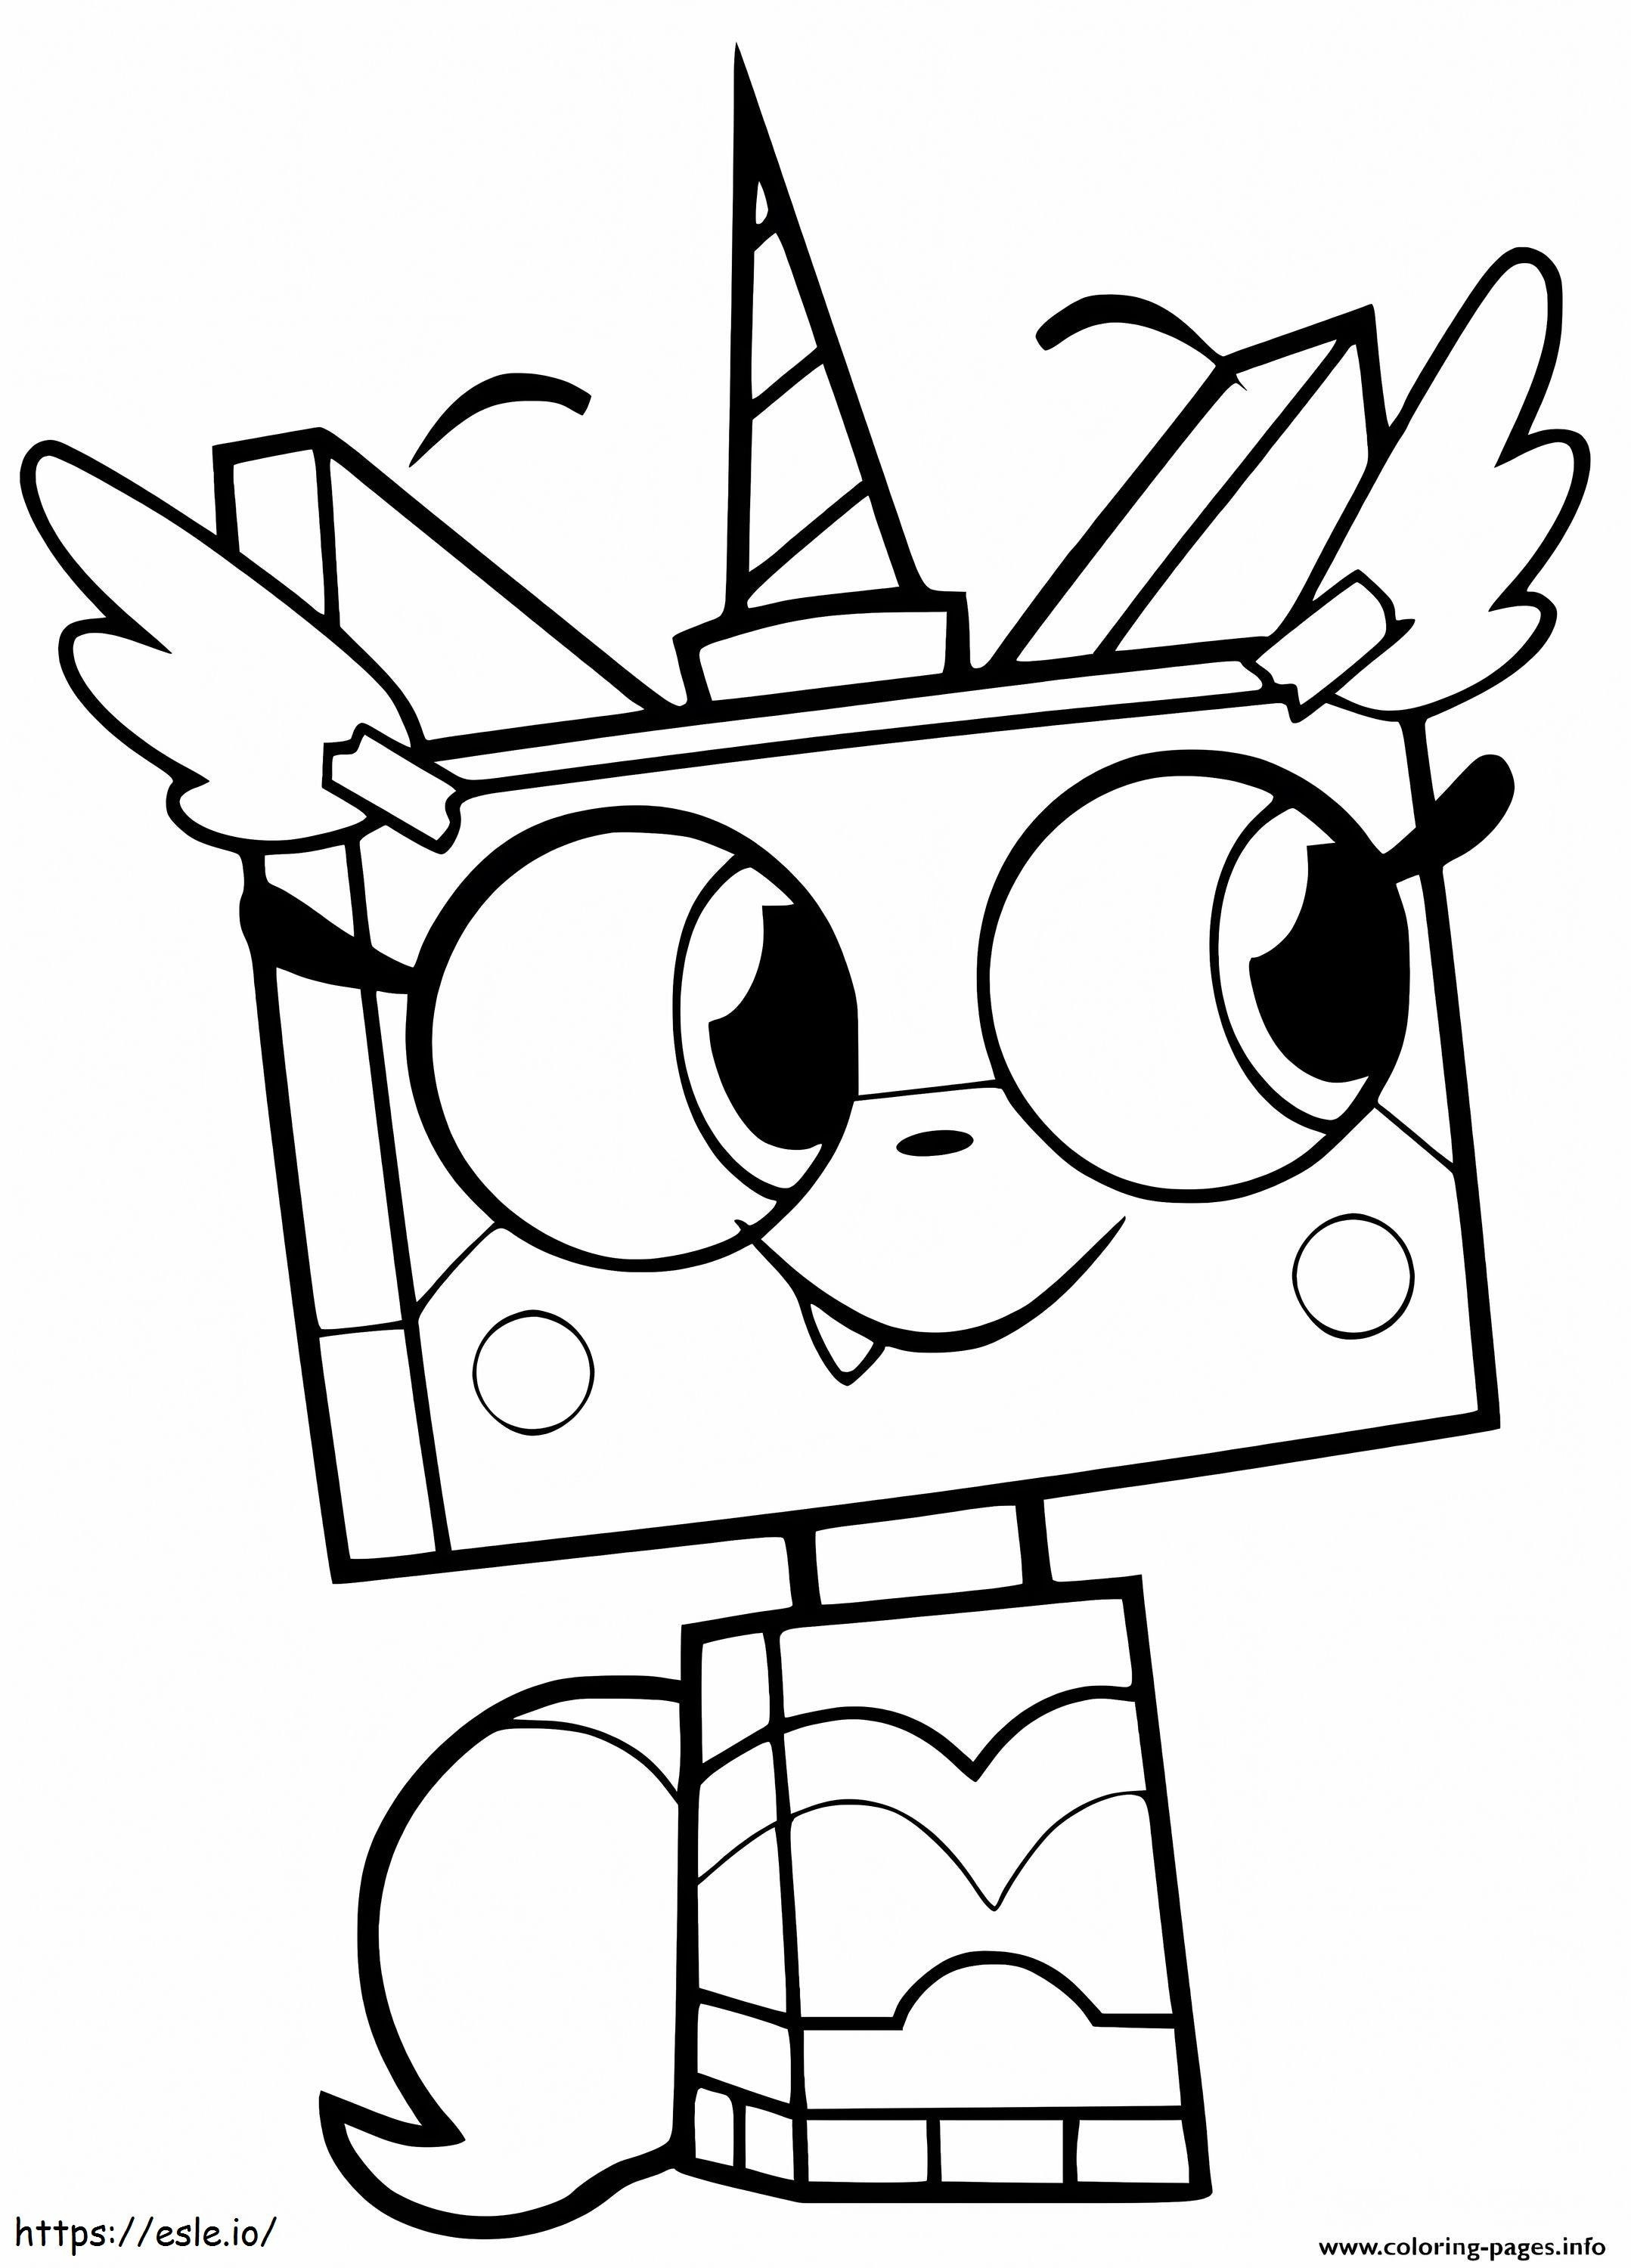 Unikitty In Wonder Woman Costume Coloring Page coloring page